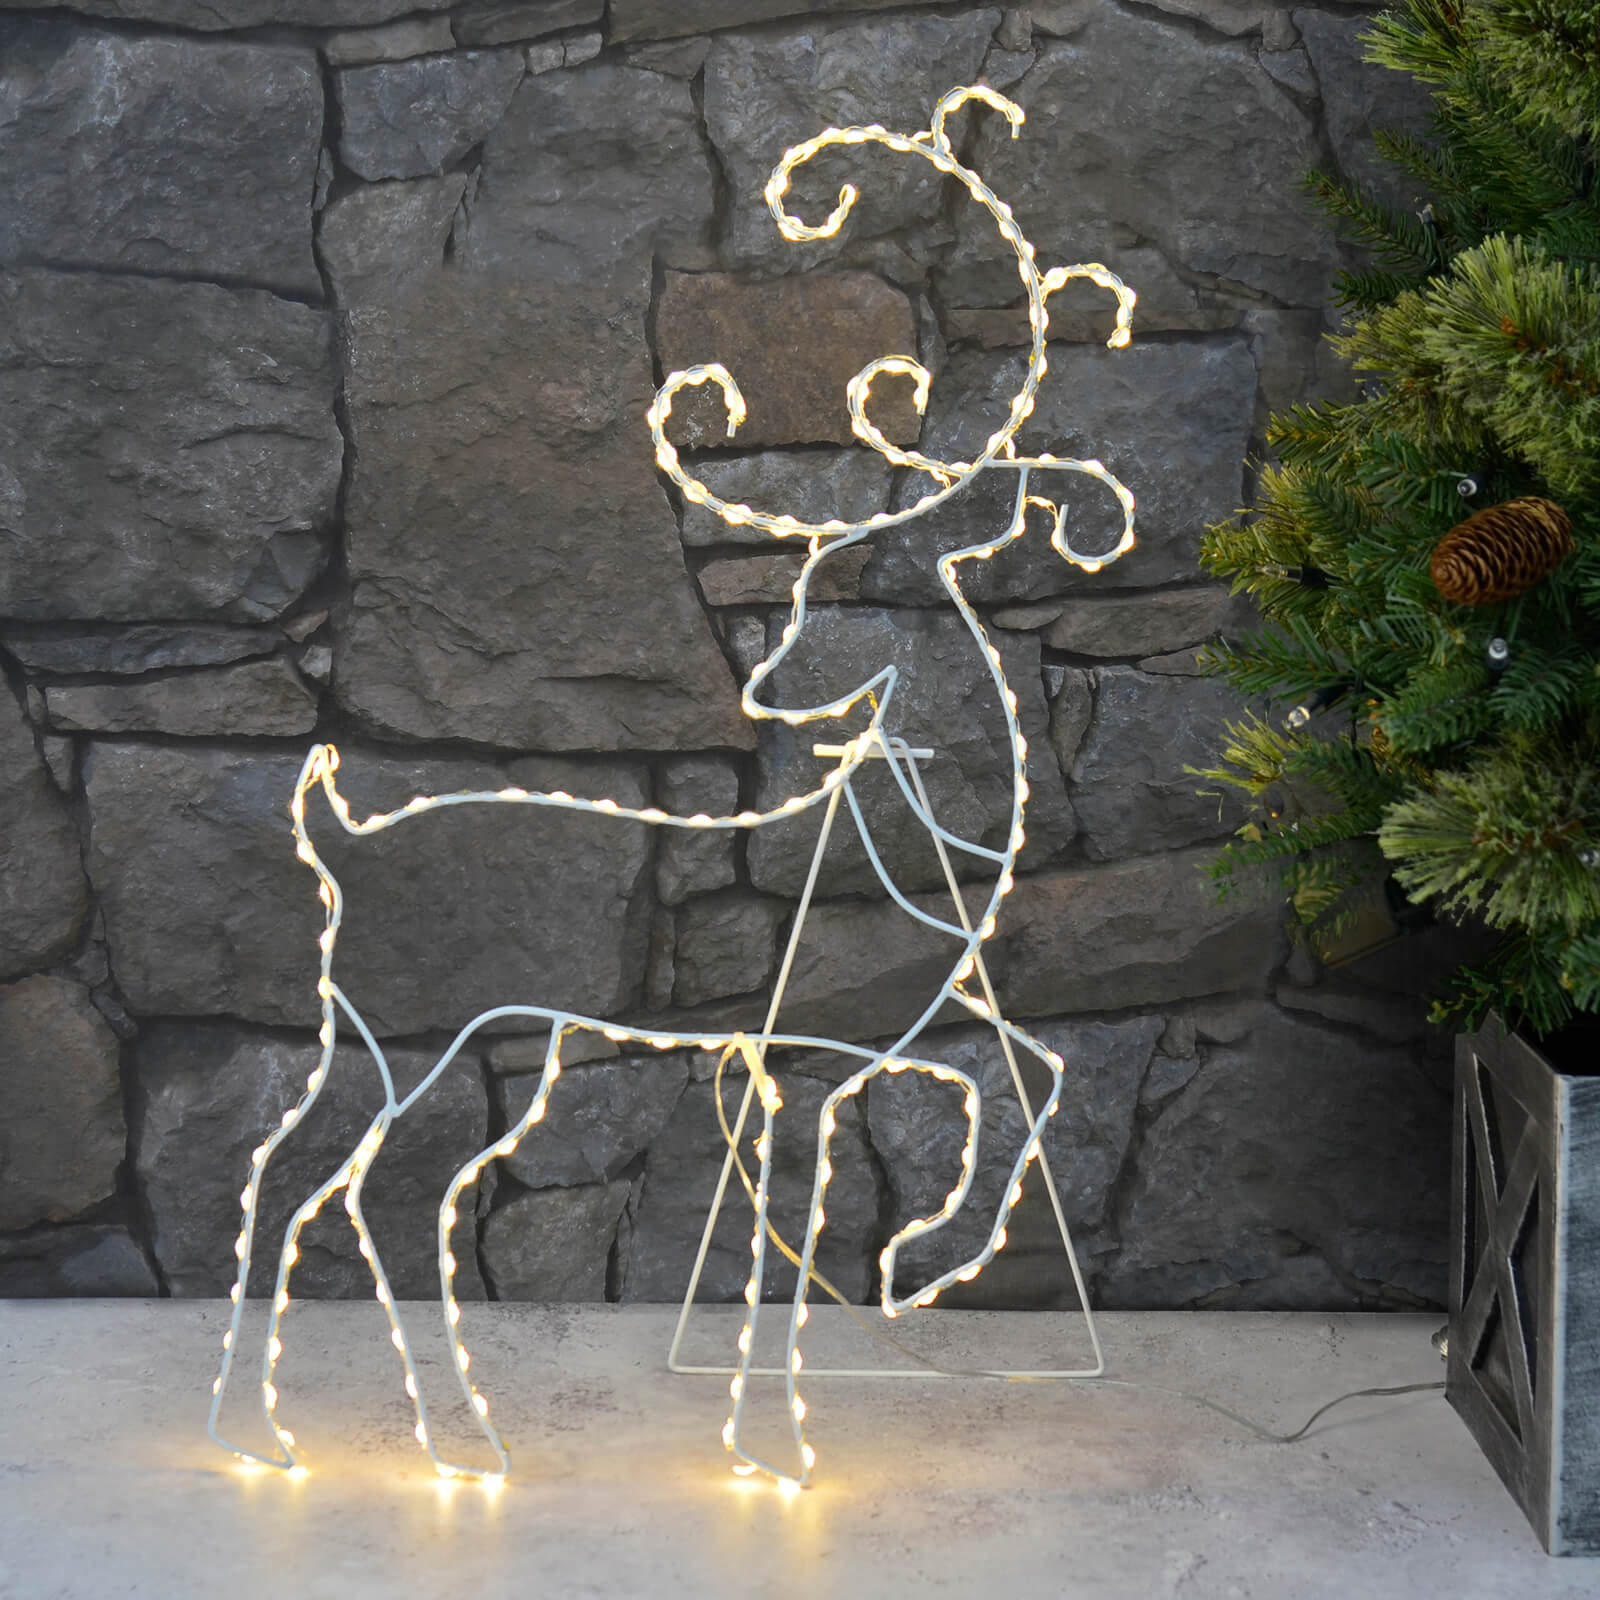 Christmas reindeer silhouette decoration lit by warm white LED lights on white wire frame on a path with stone wall and Christmas tree